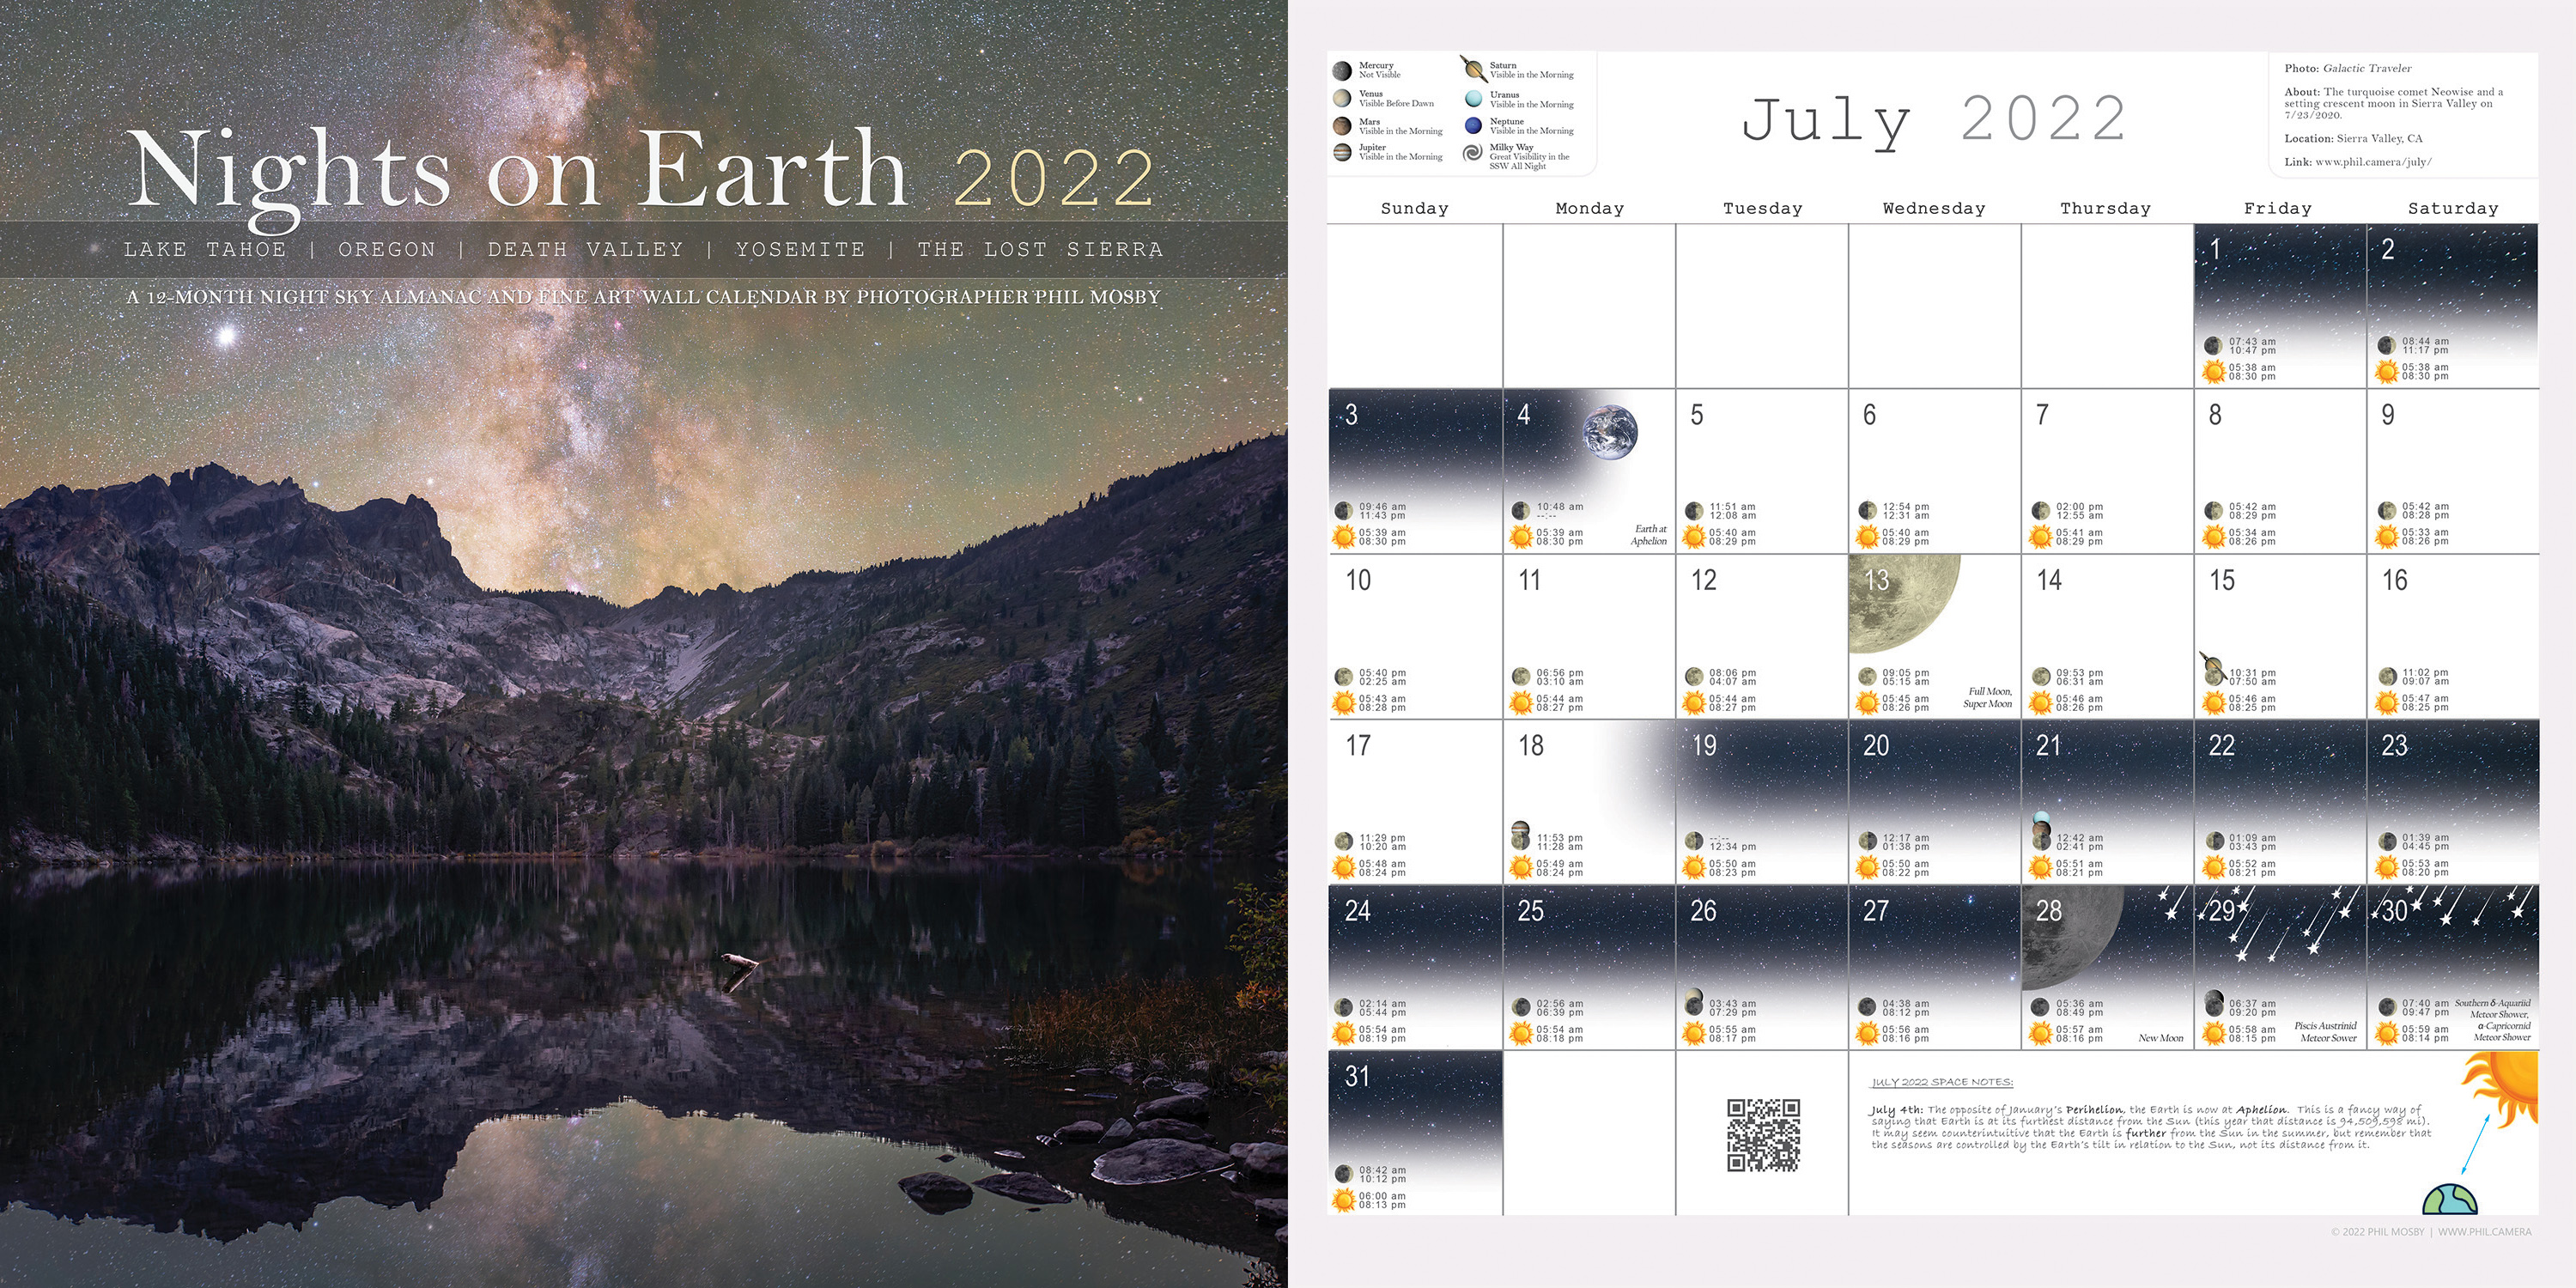 nights-on-earth-2022-nightscape-photography-calendar-and-stargazer-s-guide-to-the-lake-tahoe